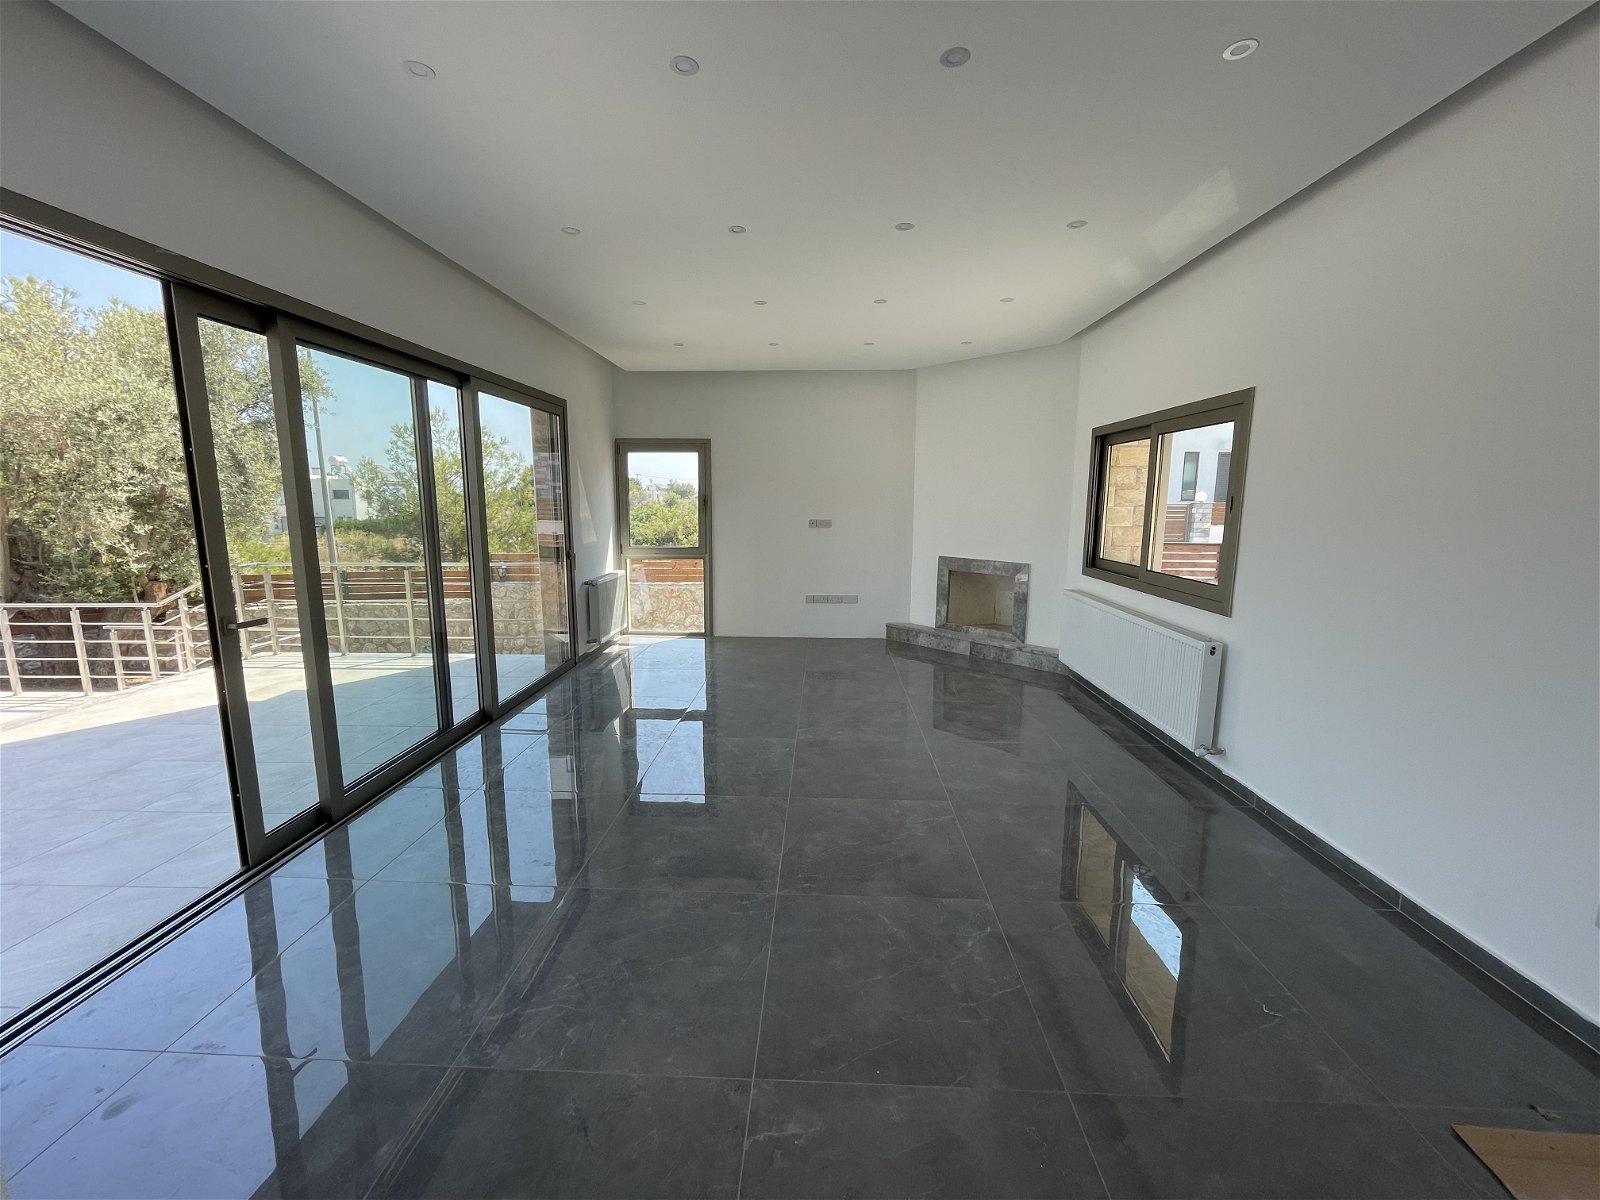 Stunning 3+1 Modern Villa with Sea and Mountain Views in Catalkoy, Kyrenia-1d5d55bb-935f-47a6-8a44-ae8ba977777d